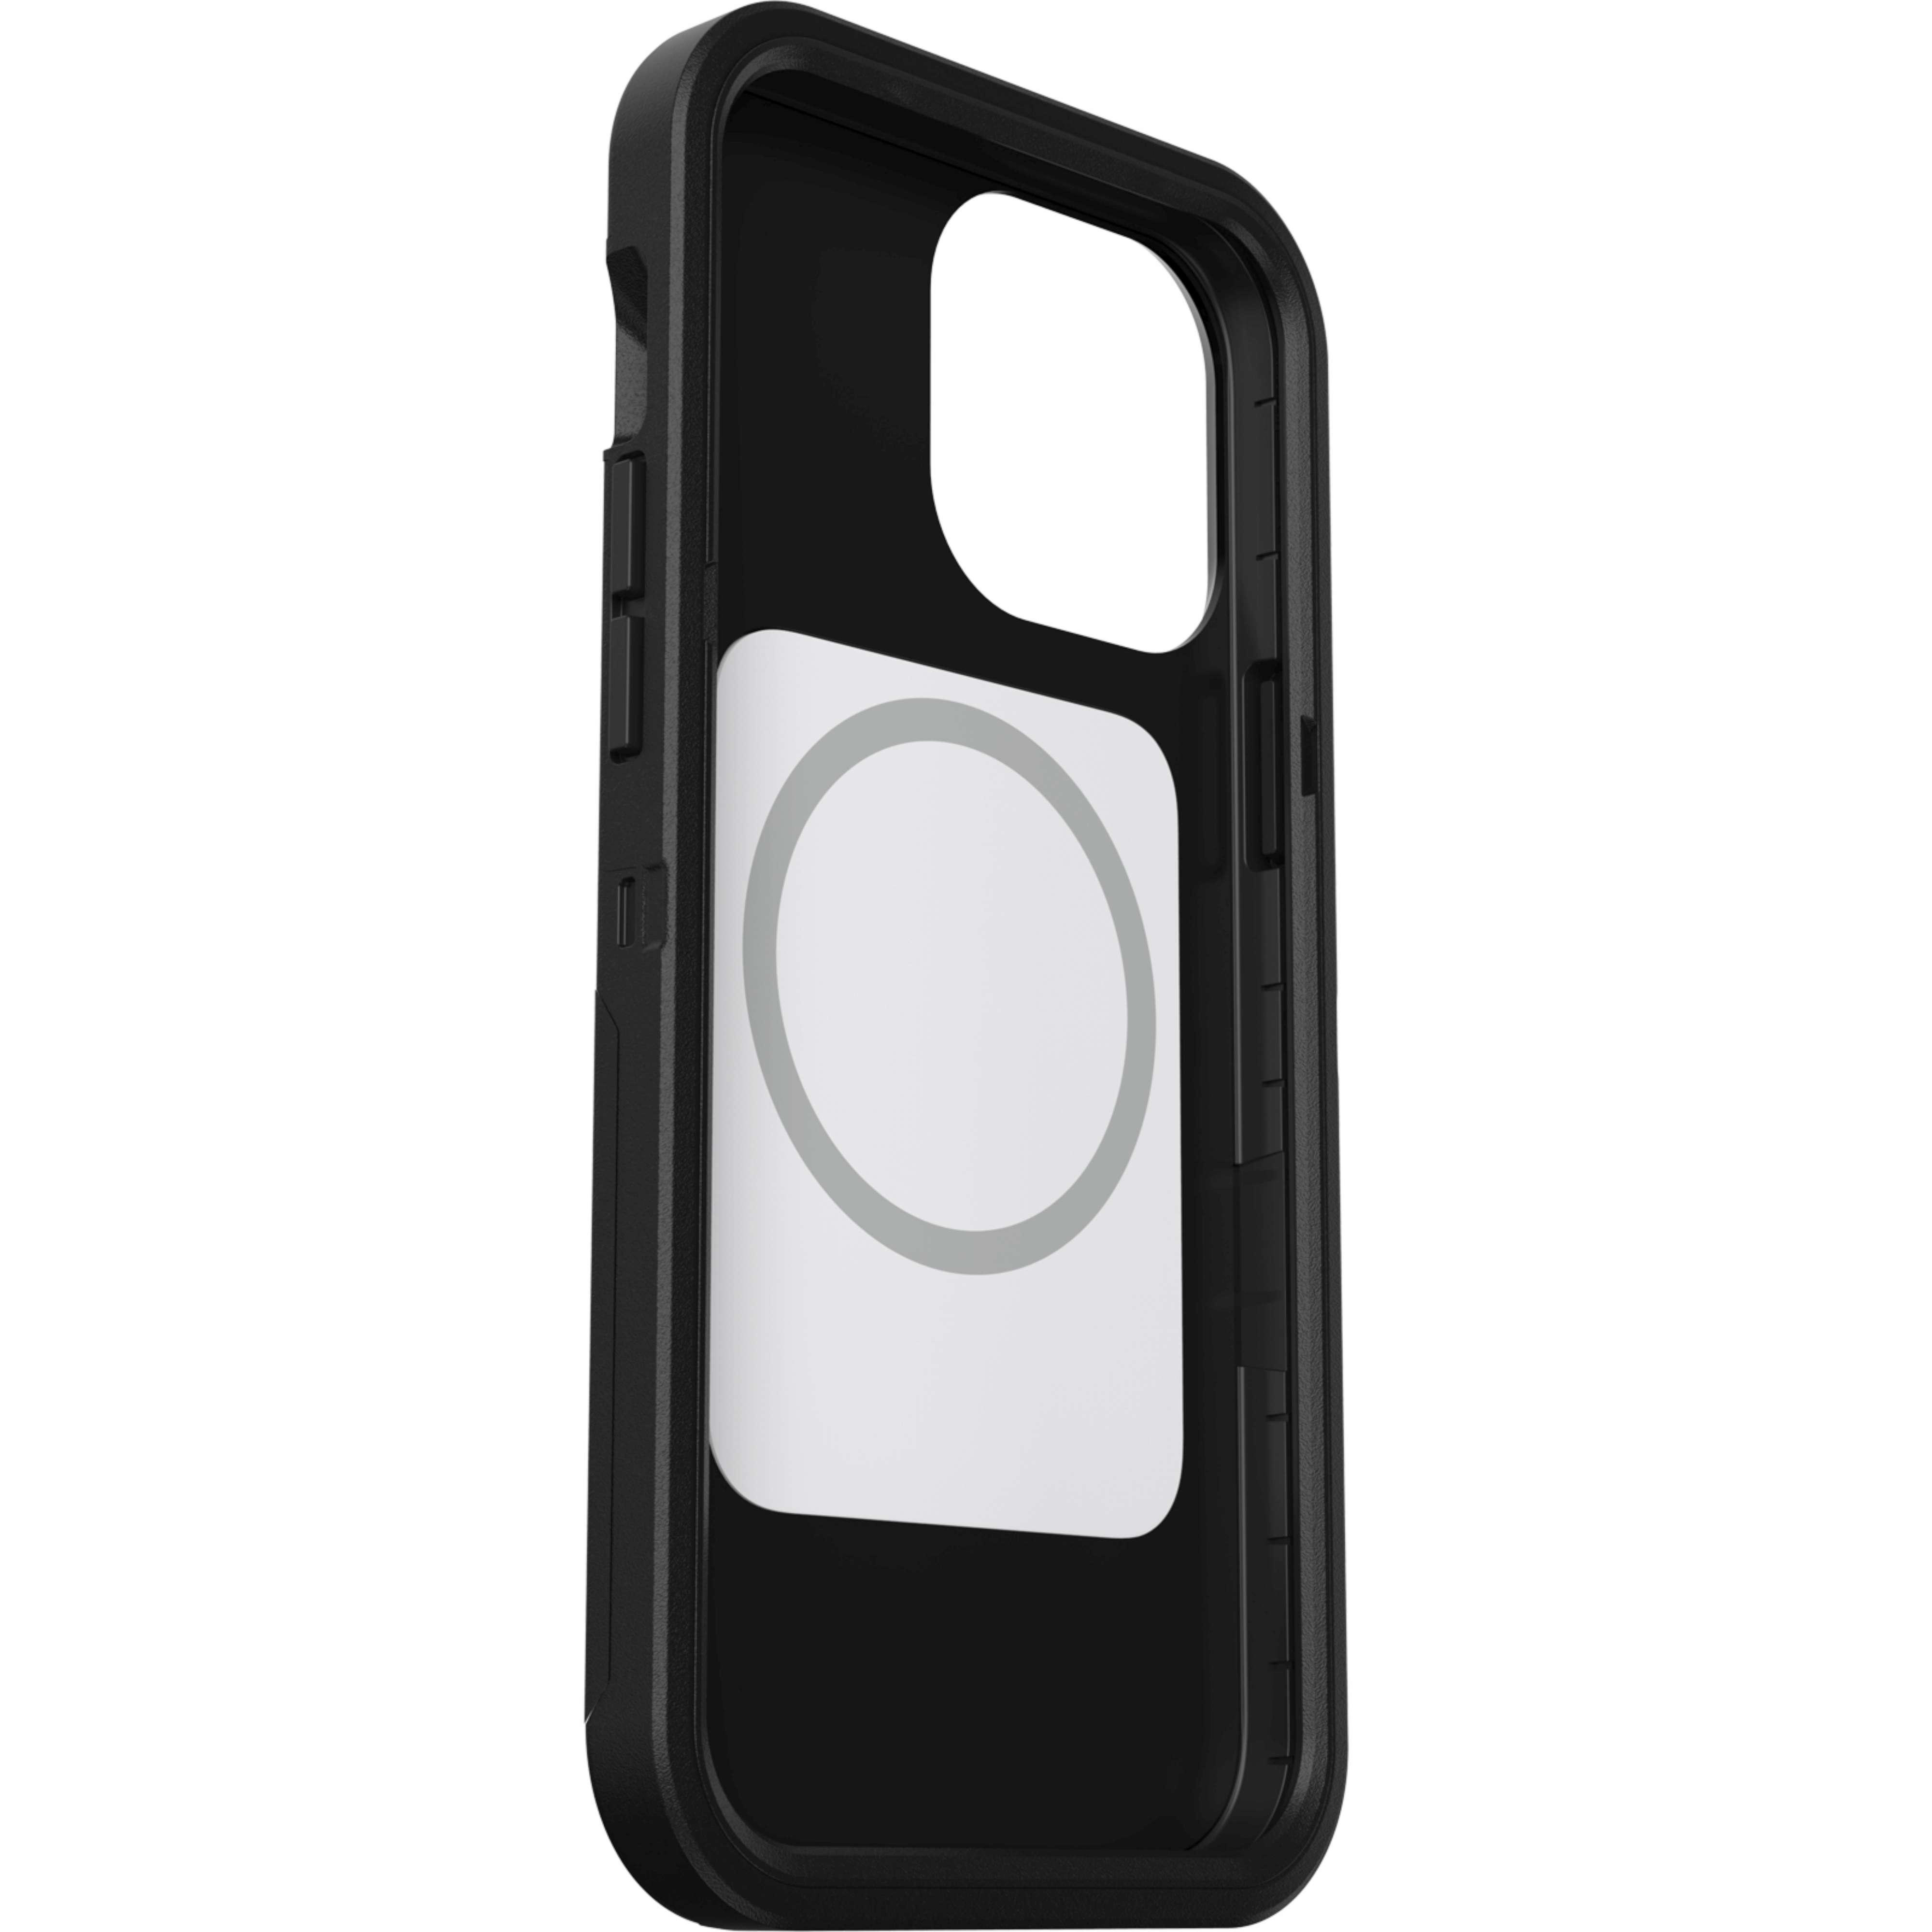 OTTERBOX Defender, Backcover, Schwarz Pro Max, iPhone 13 Apple